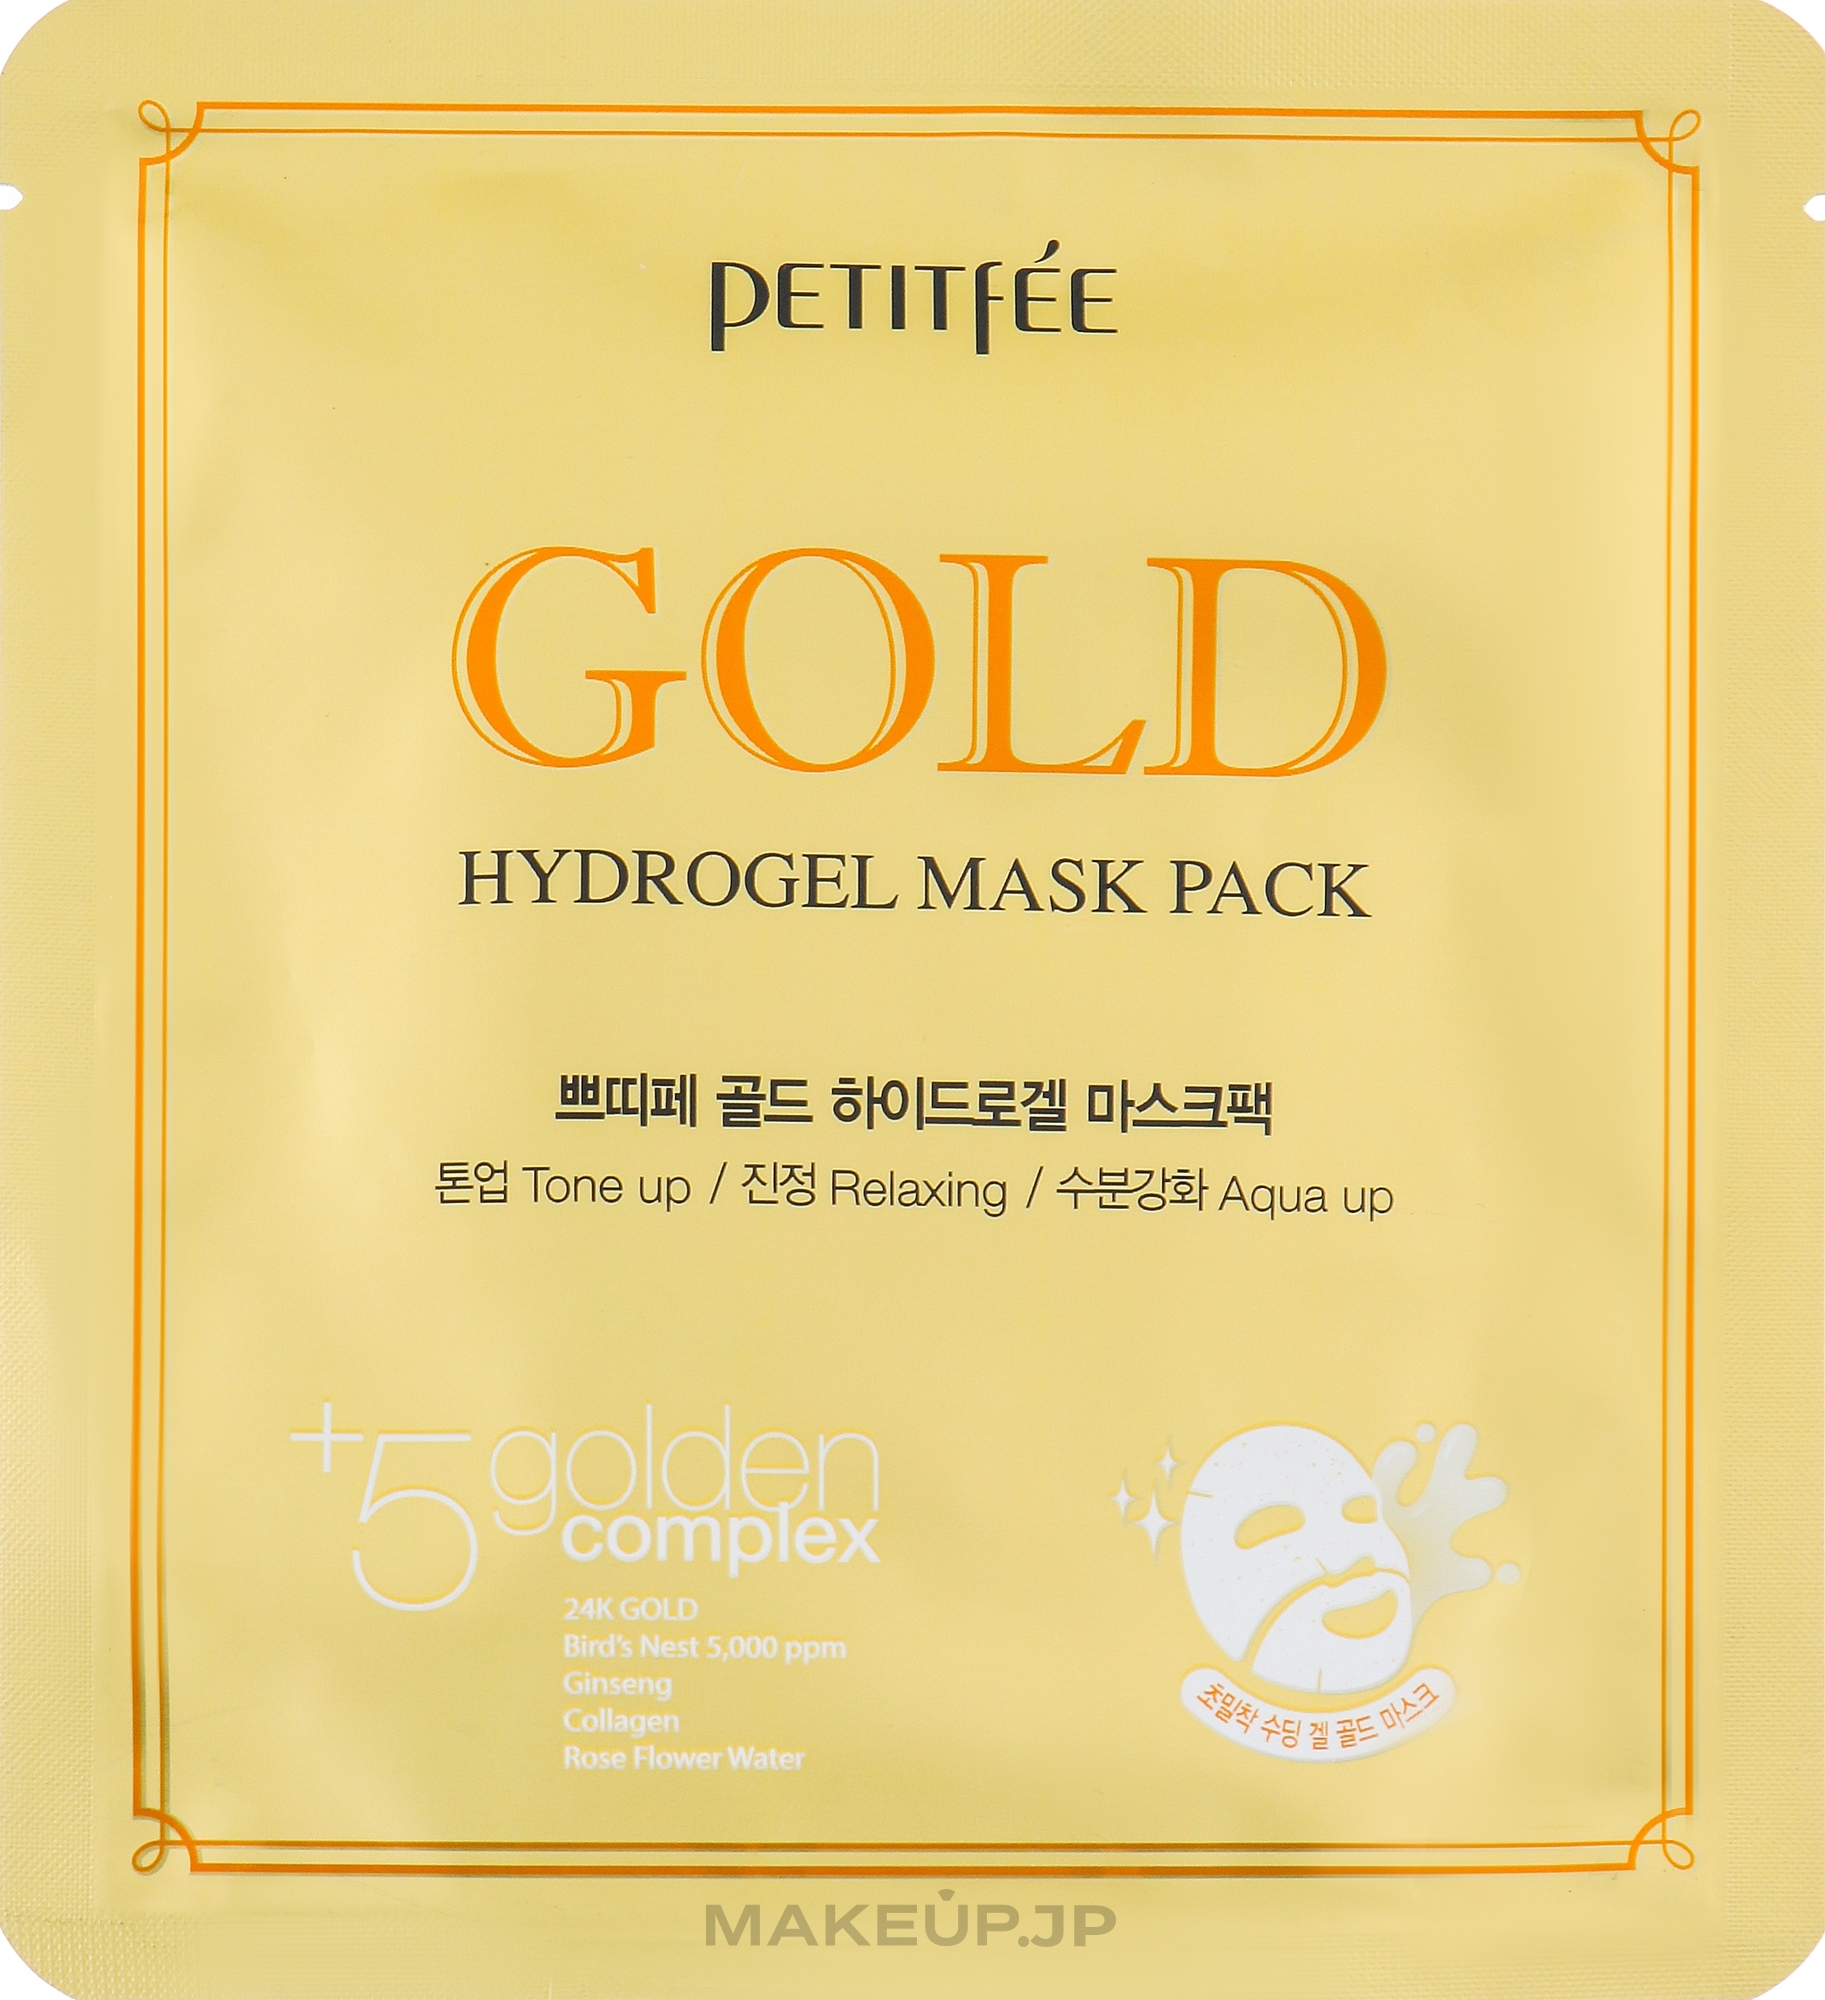 Hydrogel Face Mask with Golden Complex +5 - Petitfee&Koelf Gold Hydrogel Mask Pack +5 Golden Complex — photo 1 szt.